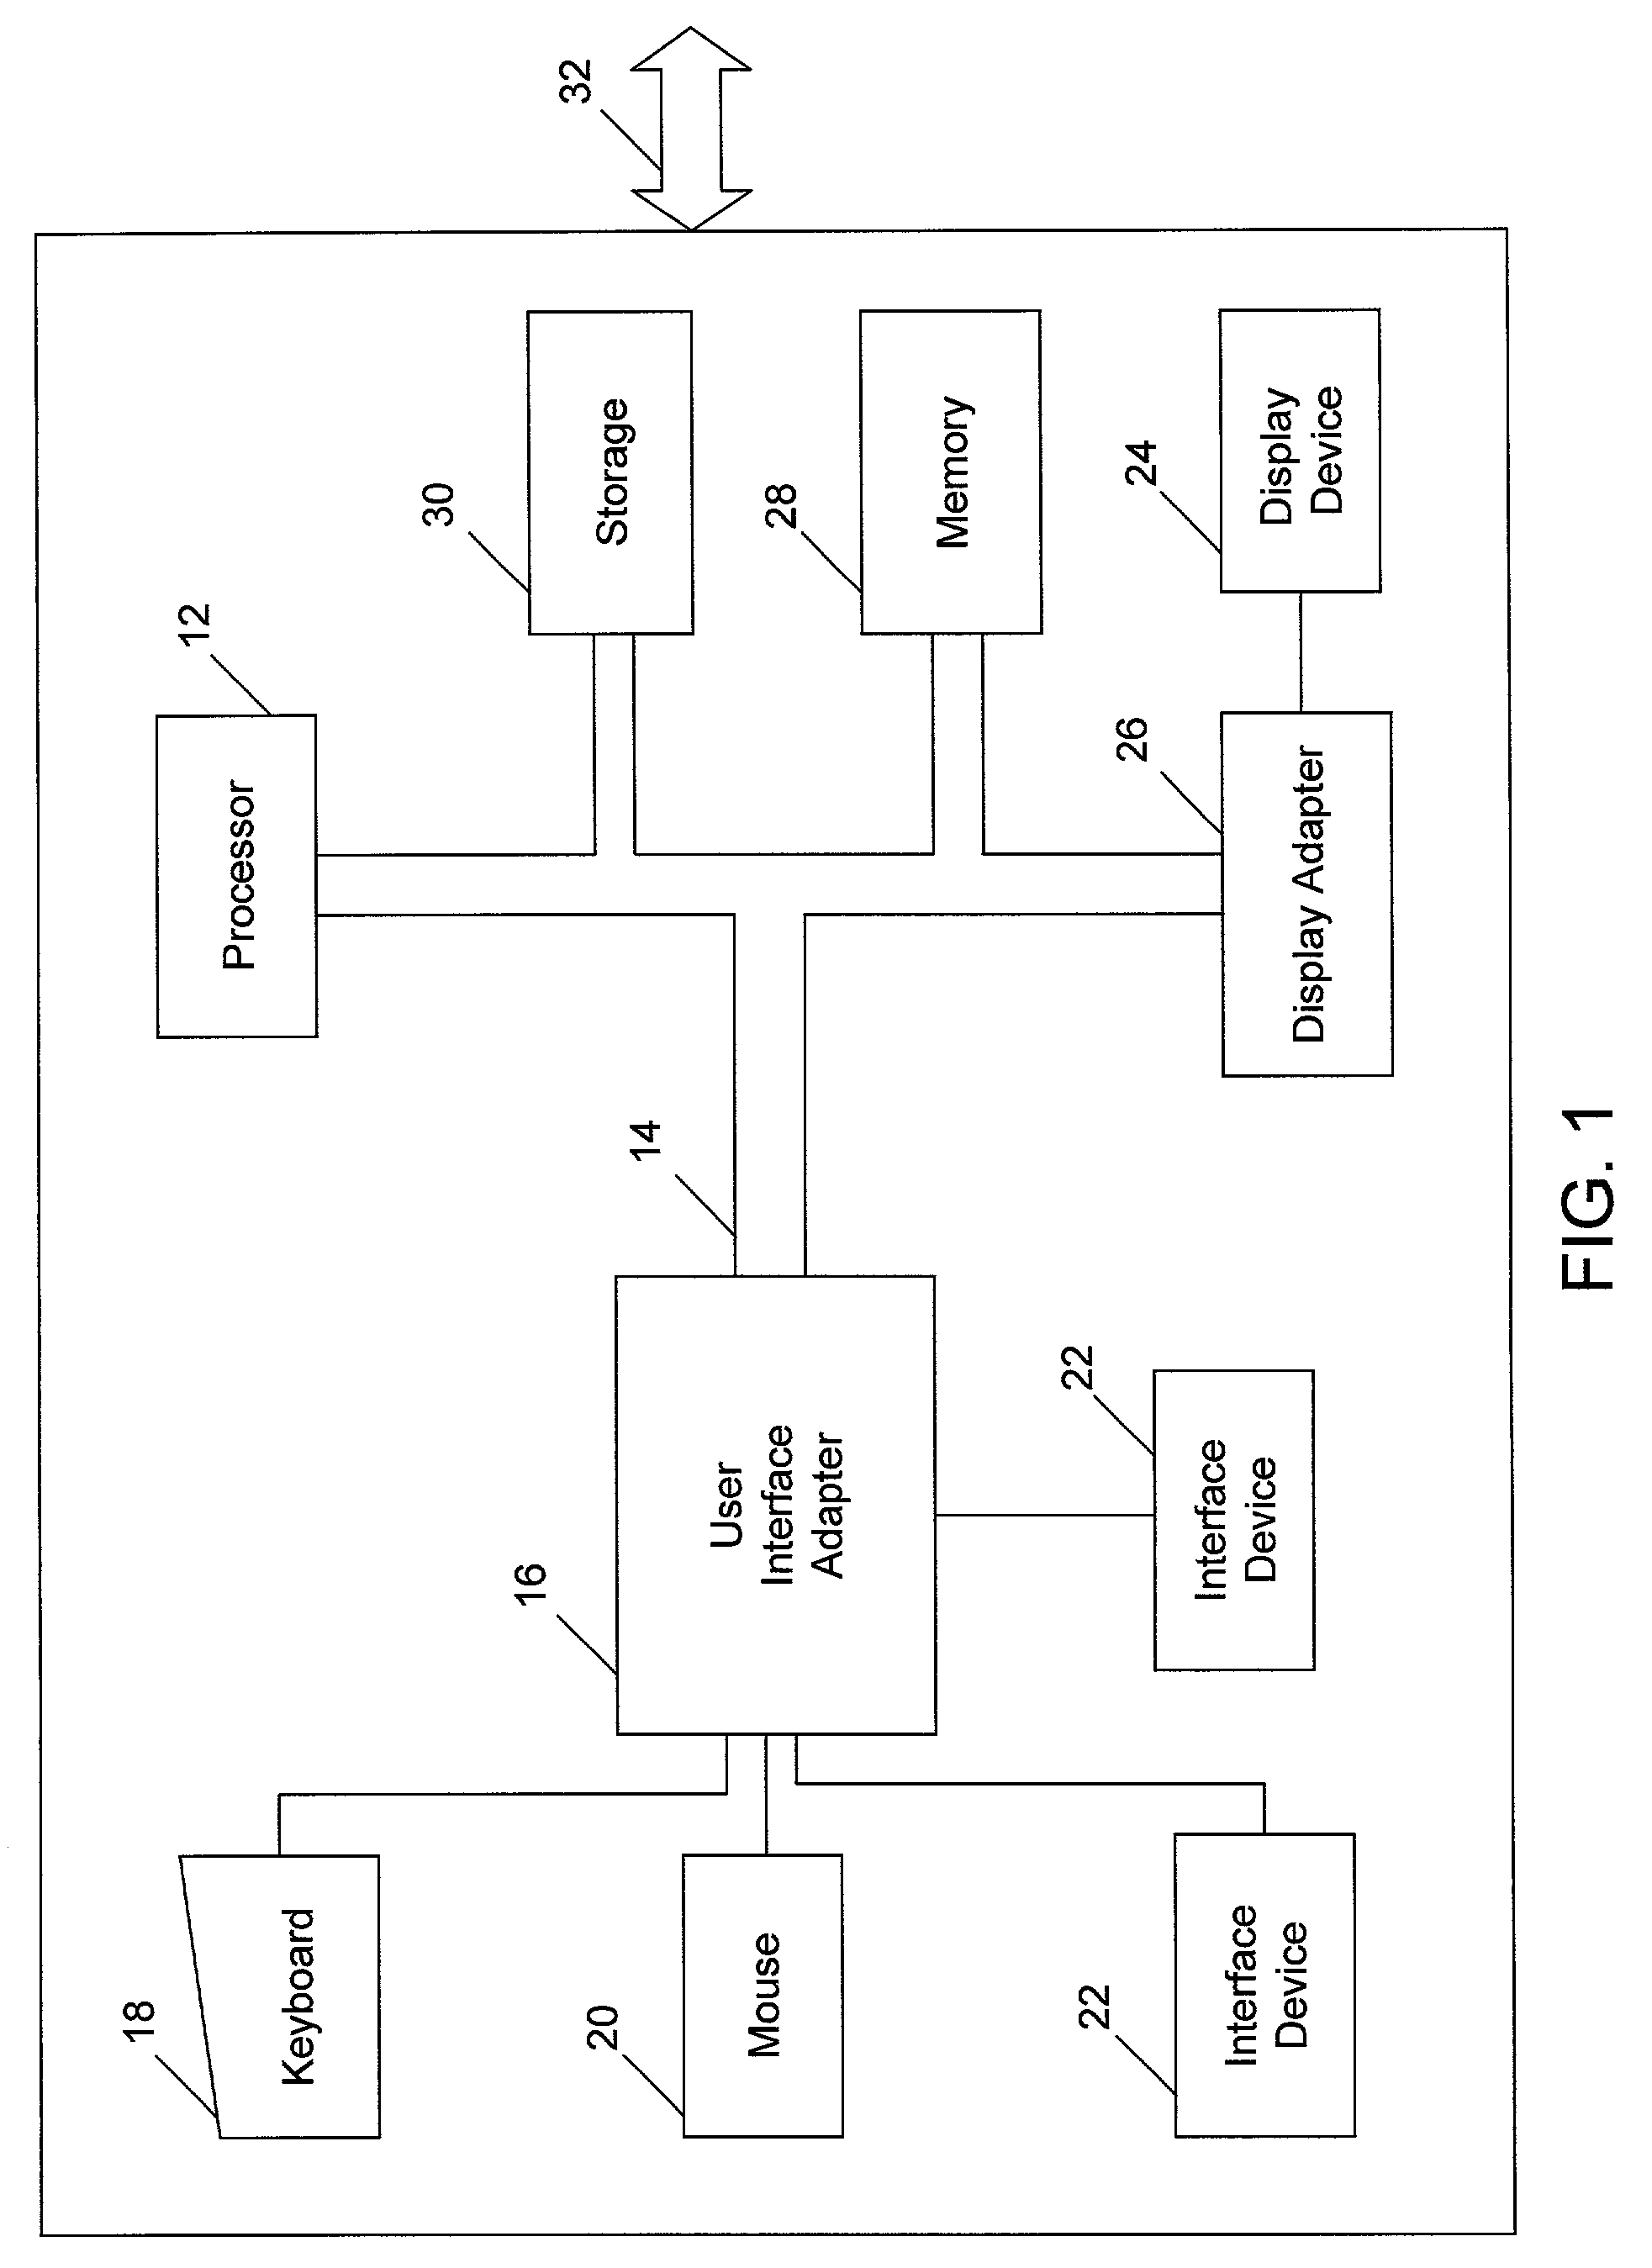 Method and system for naming a cluster of words and phrases